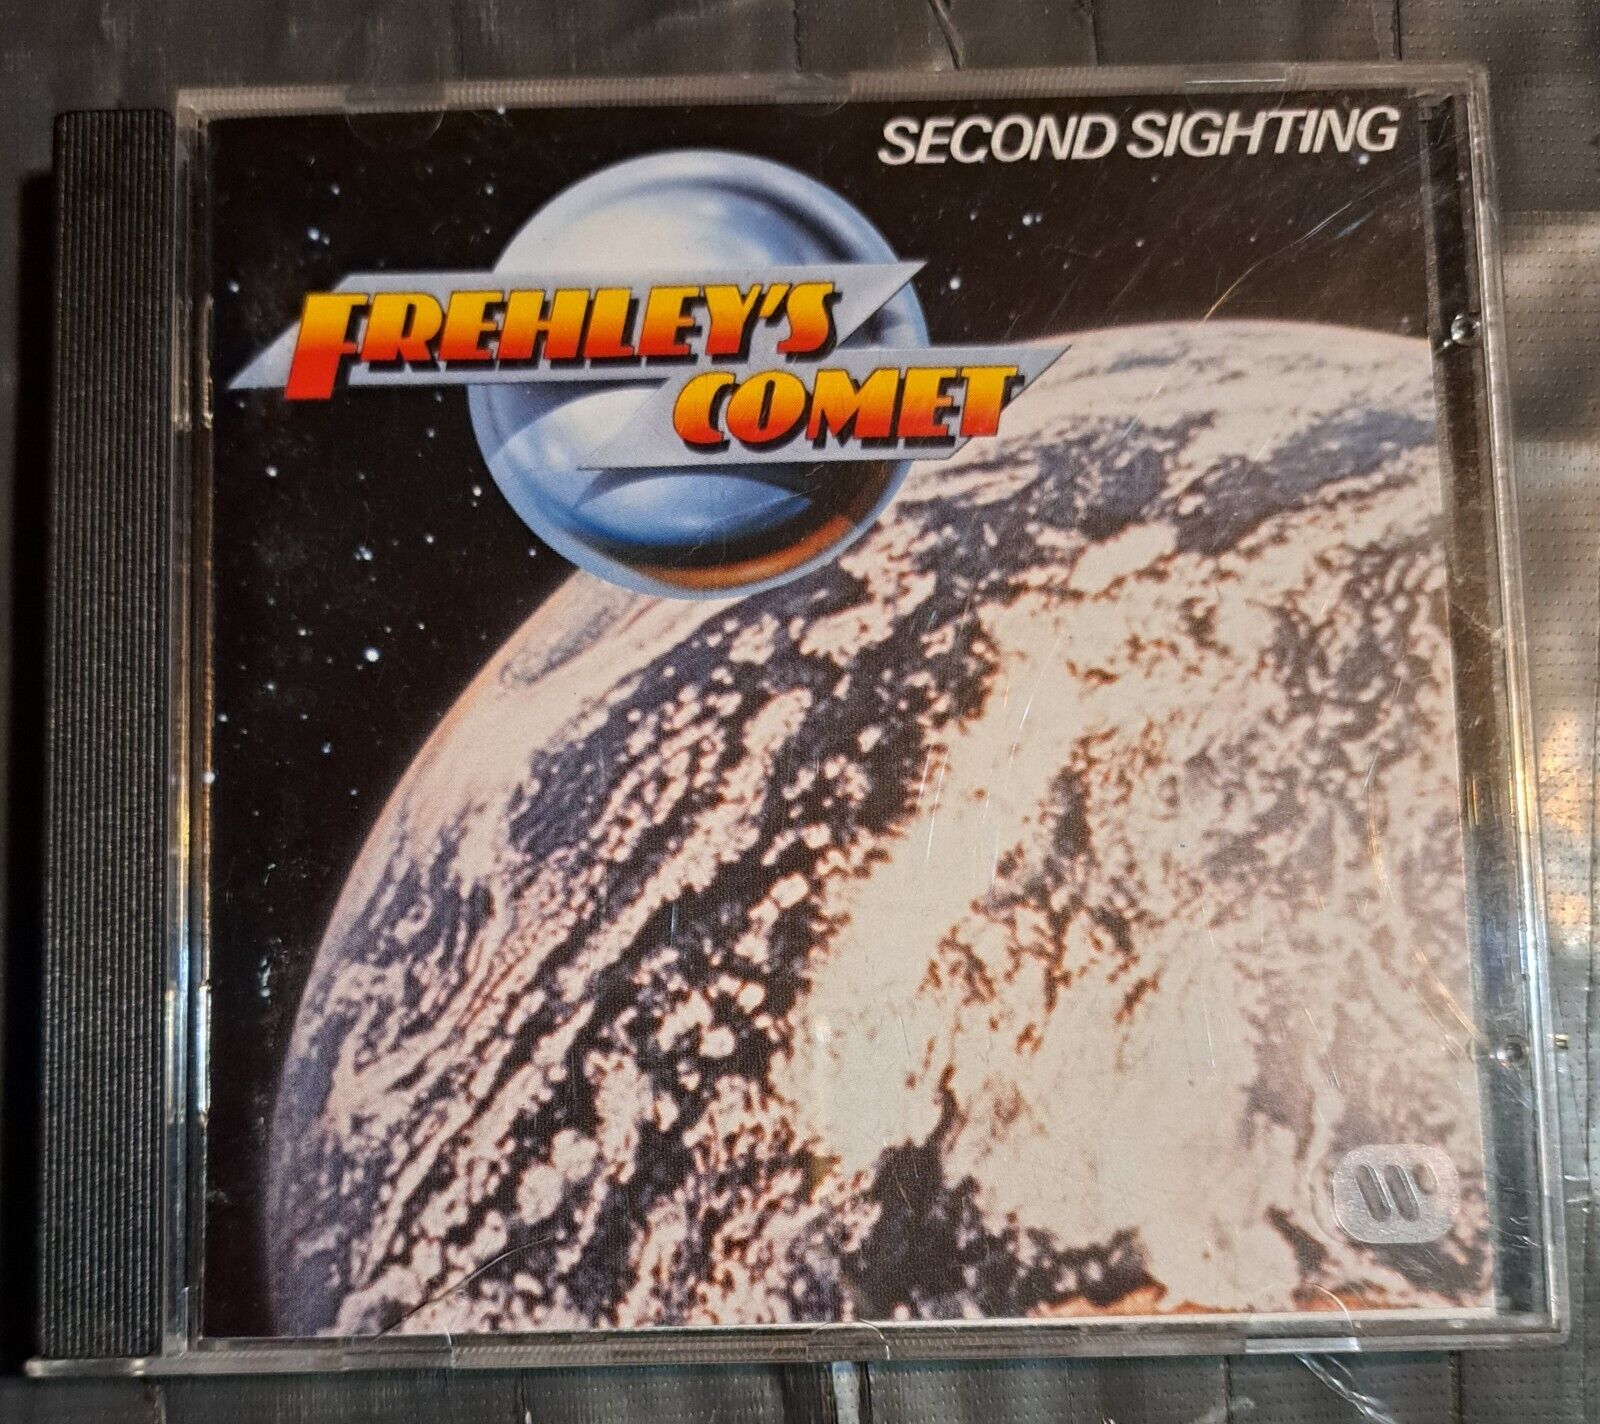 Frehley's Comet - Second Sighting CD 1998 -  Megaforce Ace Frehley 